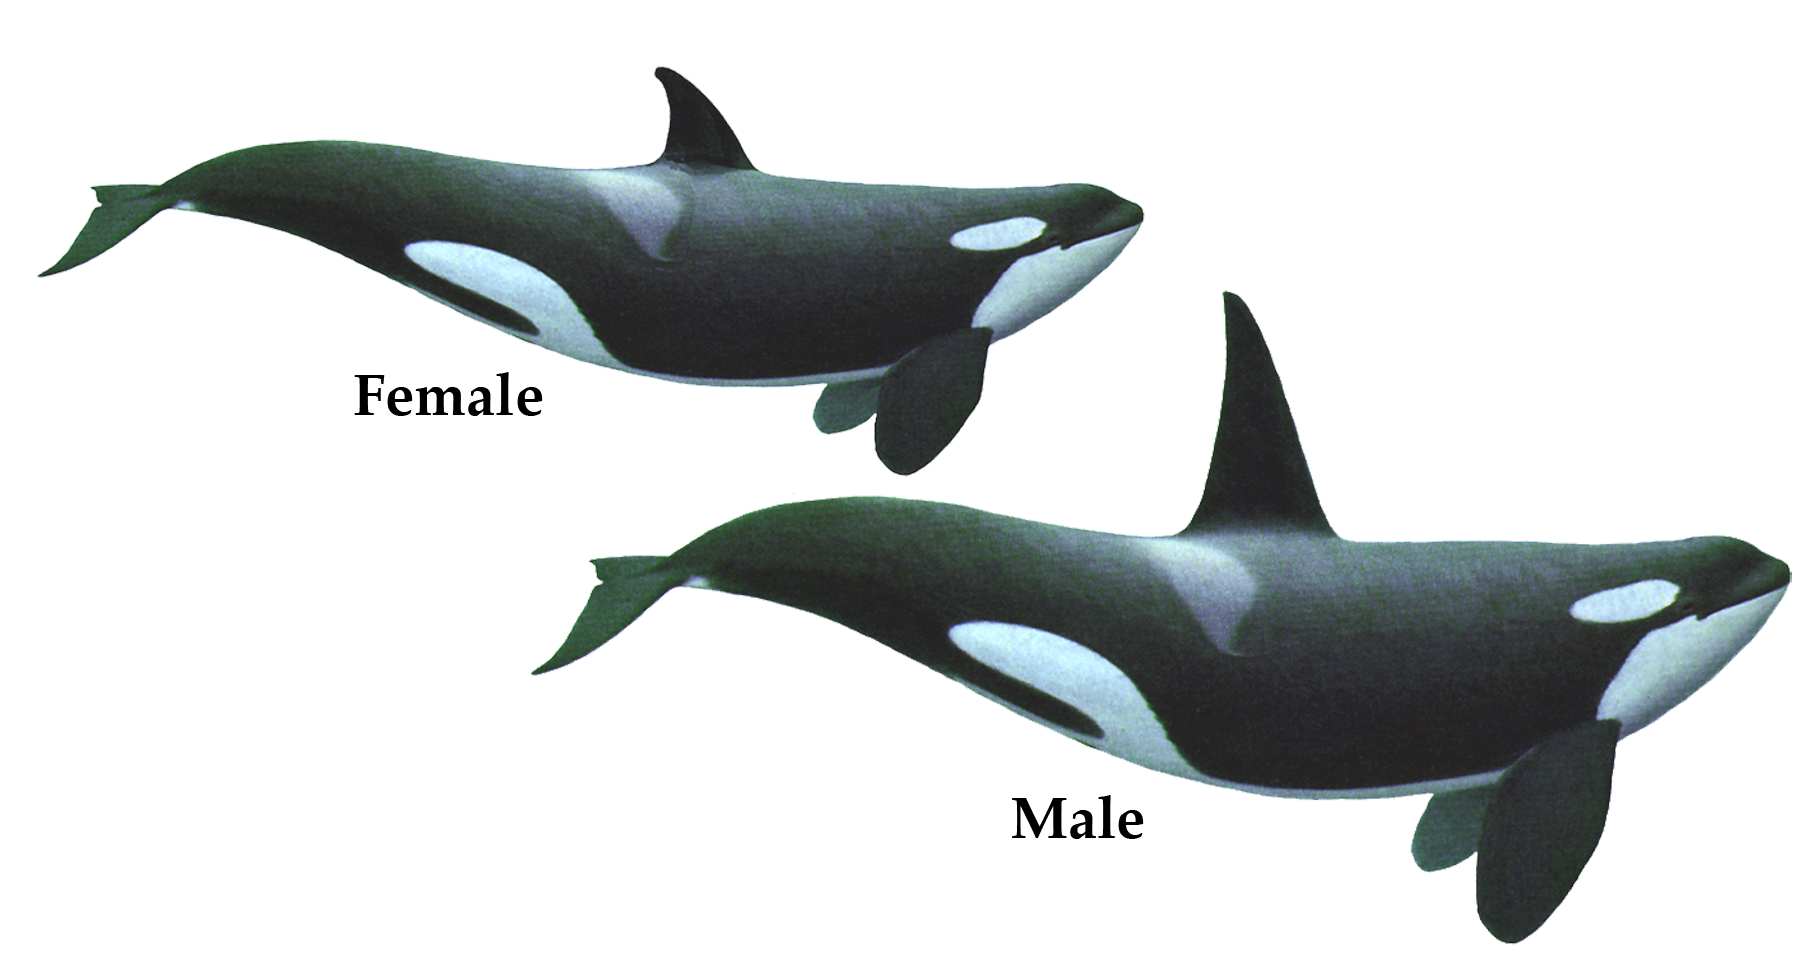 Image From Http://whaleopedia Pluspng.com/animalfund/wp Content/uploads/2013/10/ Killer Whales.png. | Whales | Pinterest - Killer Whale, Transparent background PNG HD thumbnail